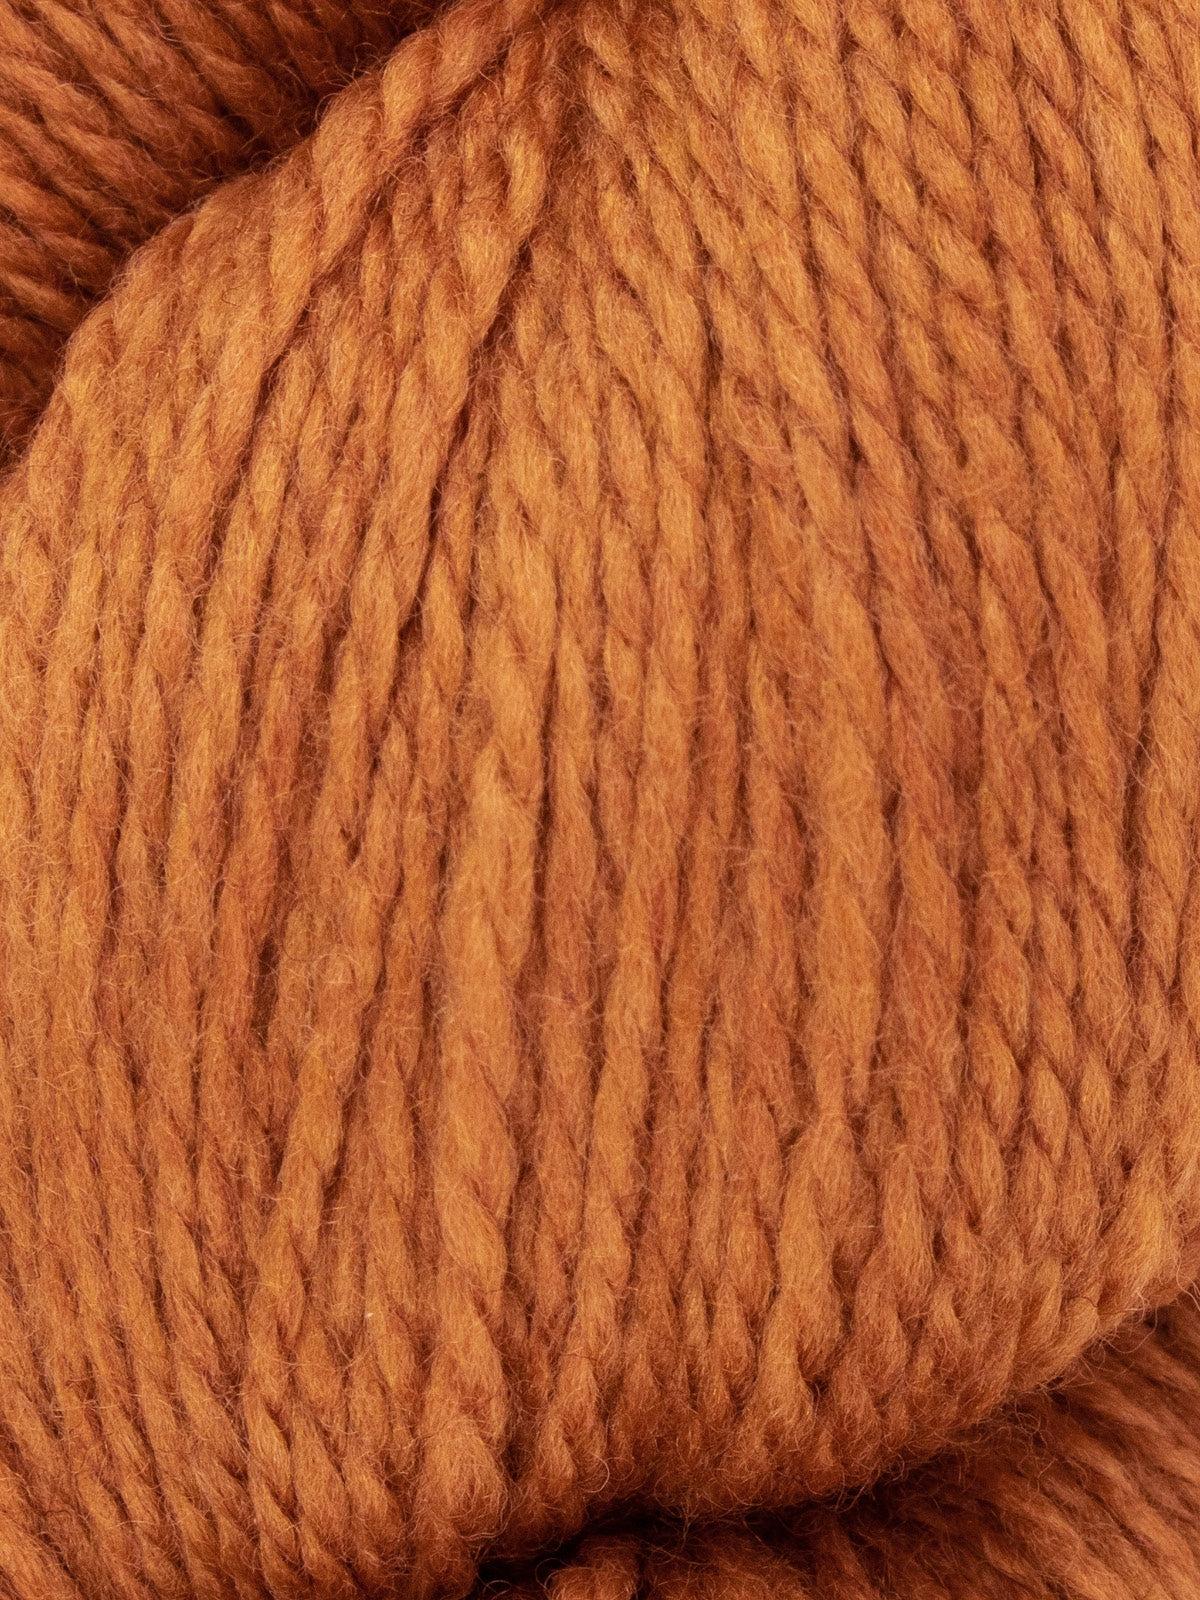 West Yorkshire Spinners Exquisite 4 Ply Yarn Ivy 1130 100g